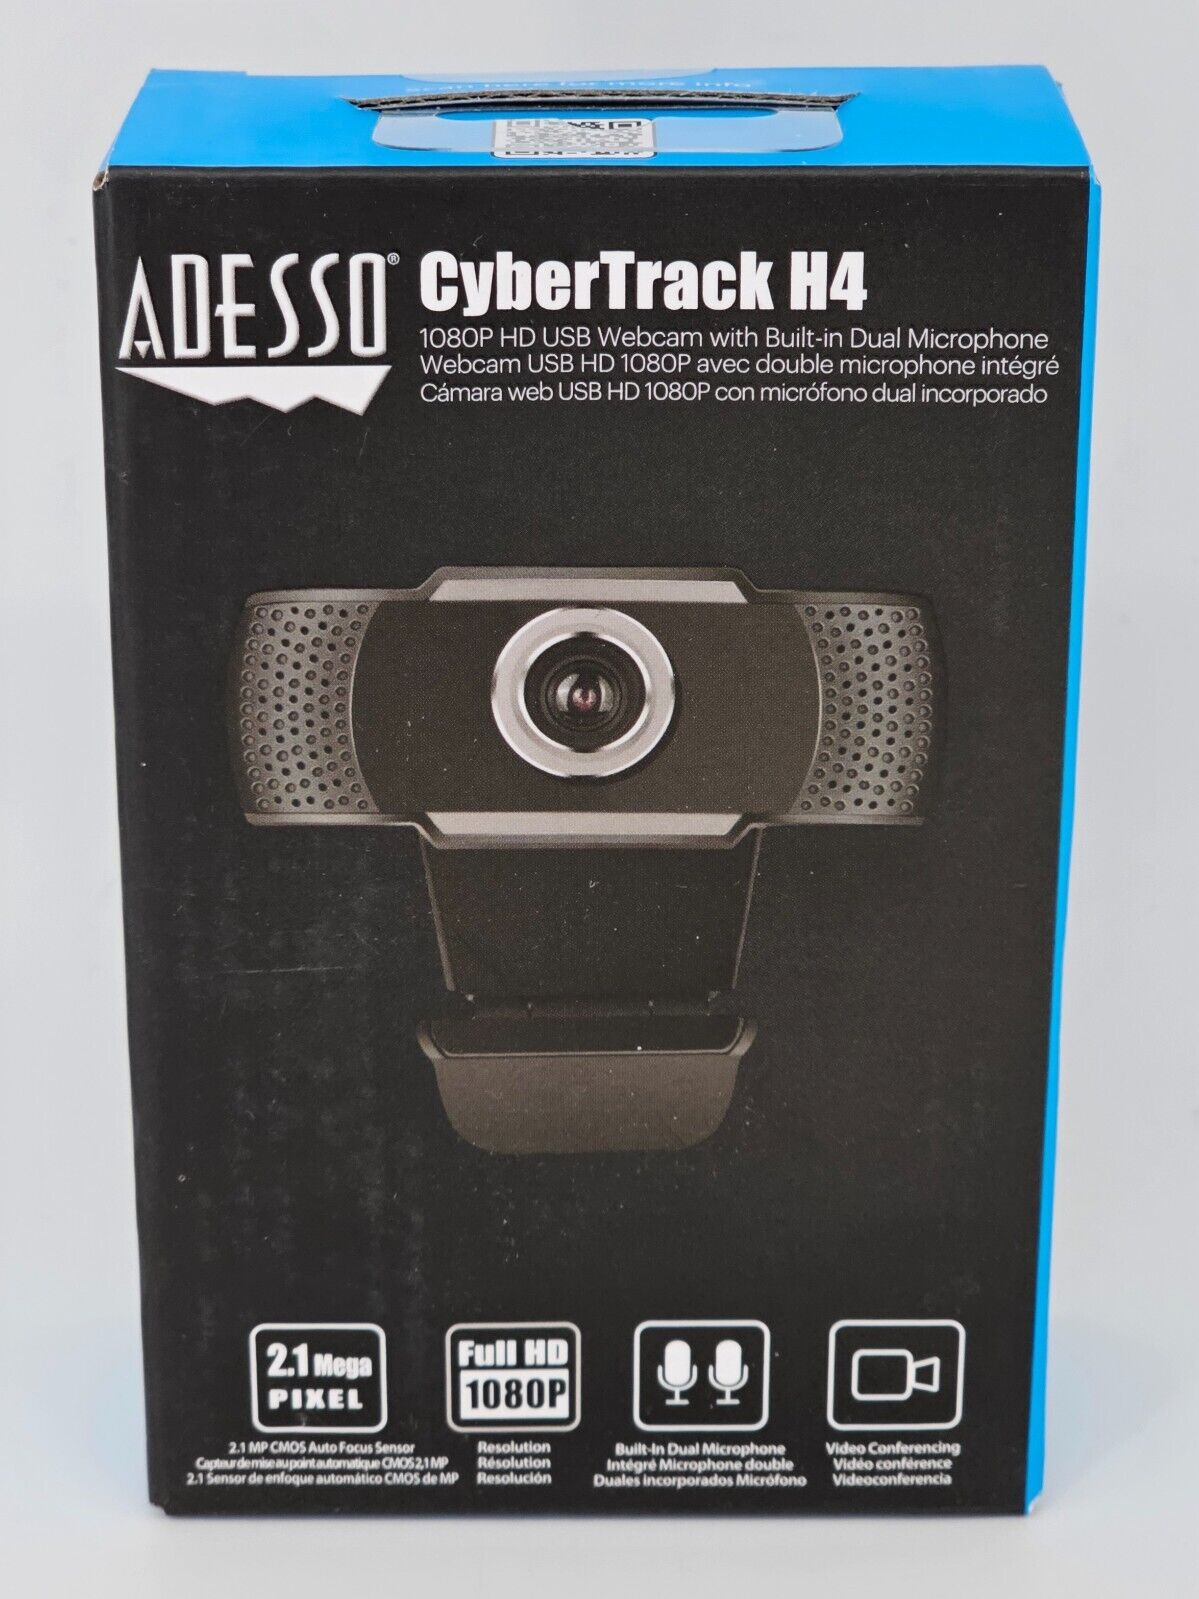 NEW Adesso Cybertrack H4 1080P HD 2.1MP USB Webcam With Built-in Mic - PC / Mac